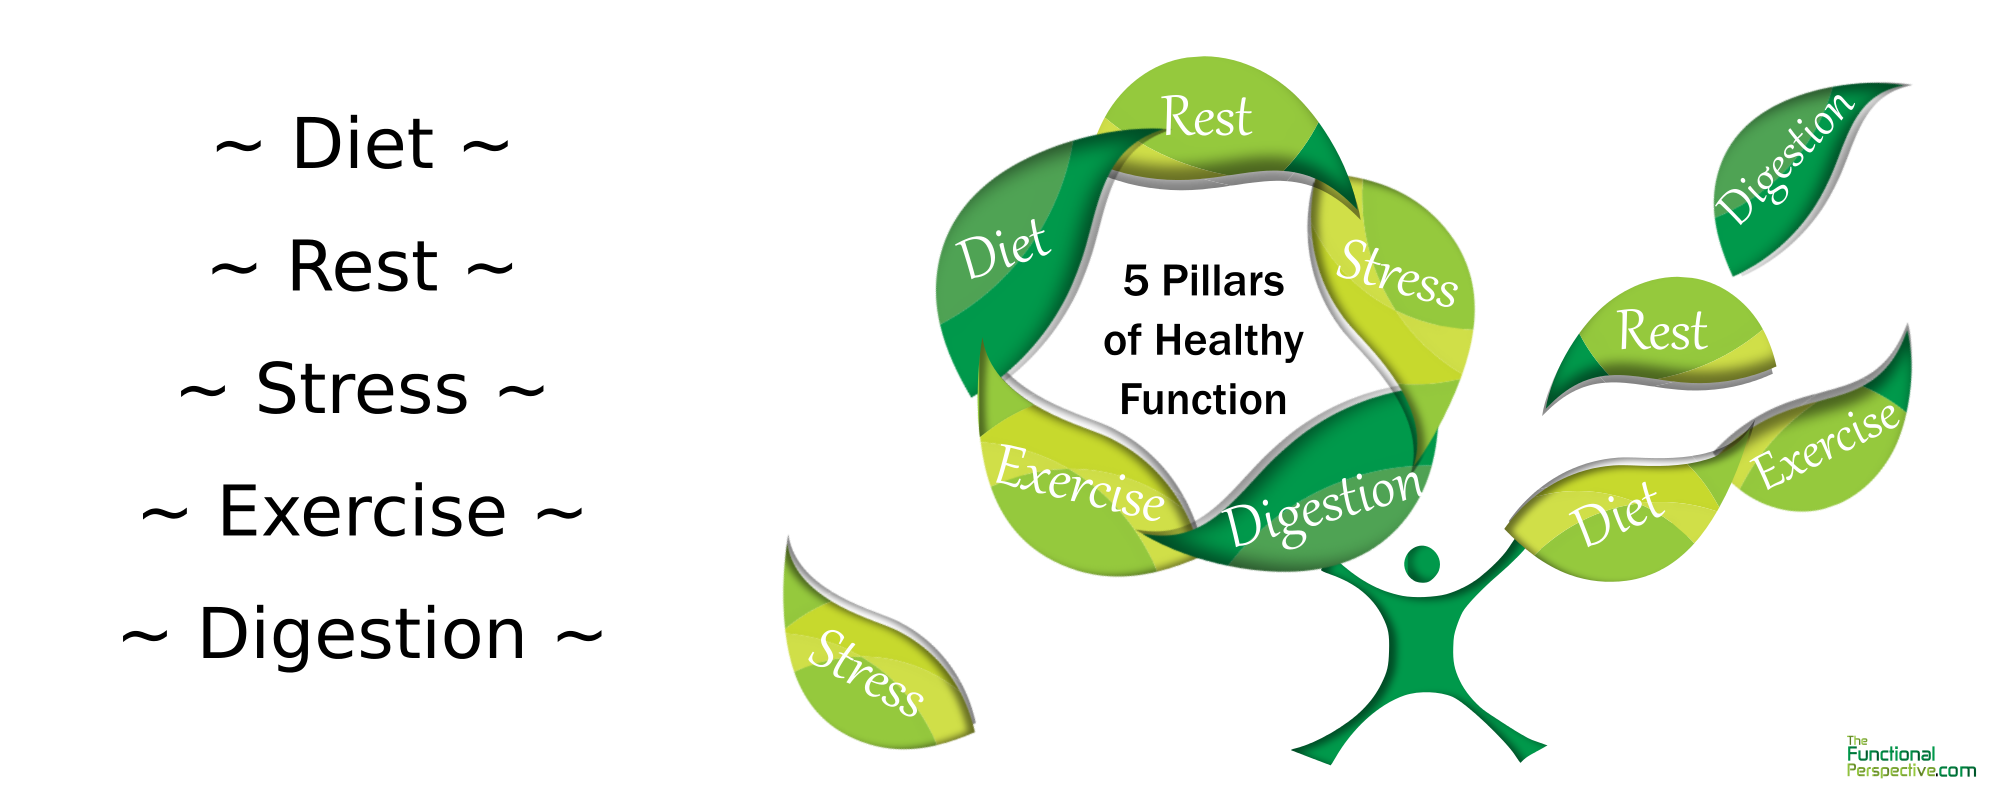 5 Pillars to Healthy Function - Diet - Rest - Stress Management - Exercise - Proper Digestion